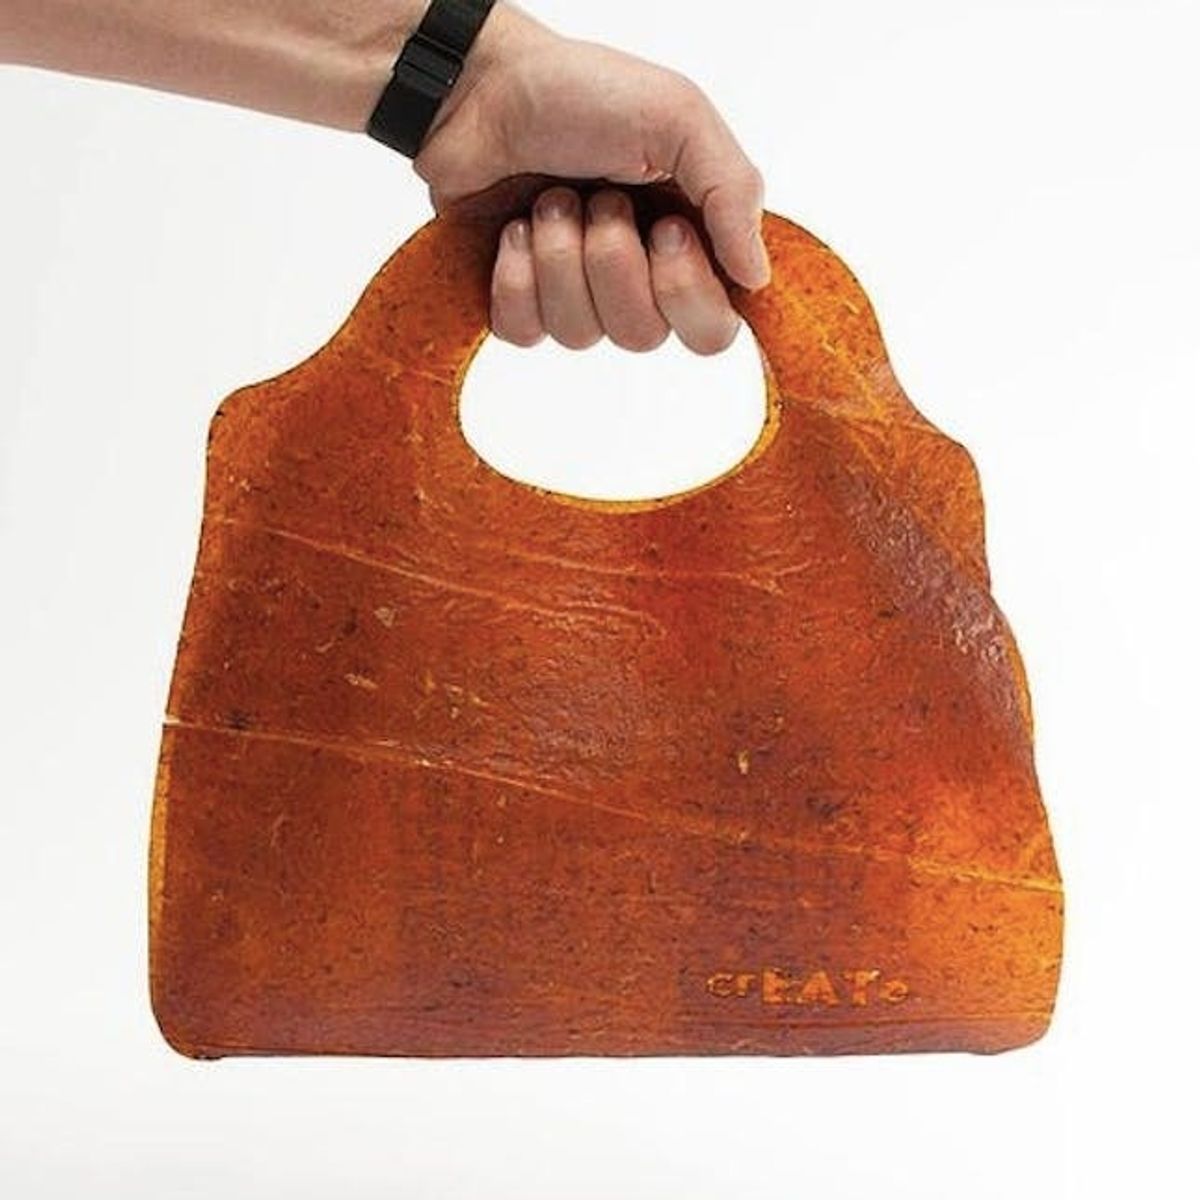 You’ll Never Guess What This Leather Is Made Of